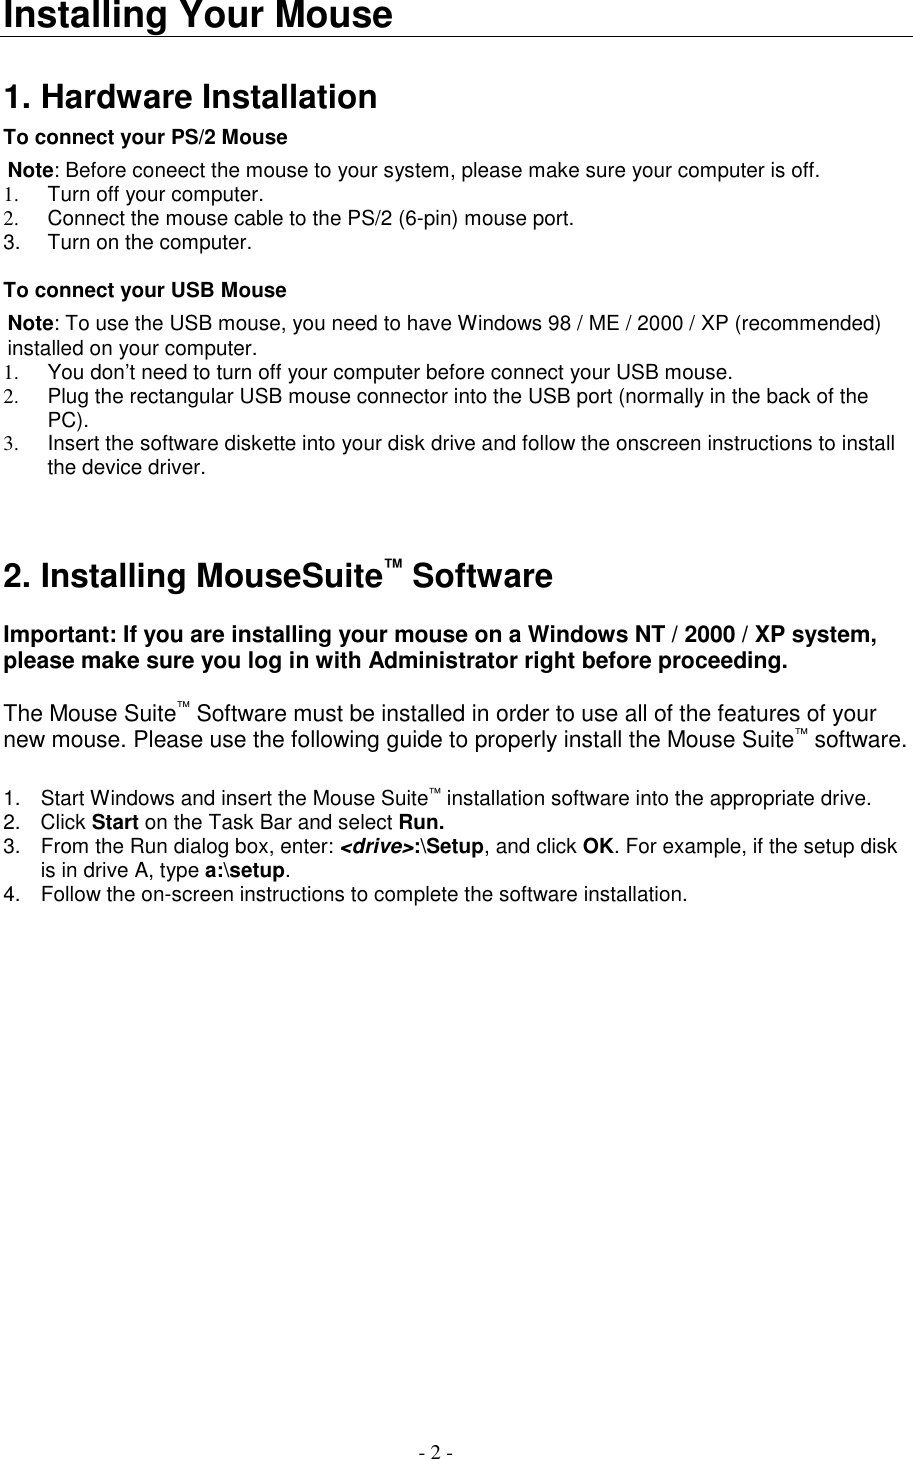 - 2 -Installing Your Mouse1. Hardware InstallationTo connect your PS/2 MouseNote: Before coneect the mouse to your system, please make sure your computer is off.1.  Turn off your computer.2.  Connect the mouse cable to the PS/2 (6-pin) mouse port.3.  Turn on the computer.To connect your USB MouseNote: To use the USB mouse, you need to have Windows 98 / ME / 2000 / XP (recommended)installed on your computer.1.  You don’t need to turn off your computer before connect your USB mouse.2.  Plug the rectangular USB mouse connector into the USB port (normally in the back of thePC).3.  Insert the software diskette into your disk drive and follow the onscreen instructions to installthe device driver.2. Installing MouseSuite™ SoftwareImportant: If you are installing your mouse on a Windows NT / 2000 / XP system,please make sure you log in with Administrator right before proceeding.The Mouse Suite™ Software must be installed in order to use all of the features of yournew mouse. Please use the following guide to properly install the Mouse Suite™ software.1.  Start Windows and insert the Mouse Suite™ installation software into the appropriate drive.2. Click Start on the Task Bar and select Run.3.  From the Run dialog box, enter: &lt;drive&gt;:\Setup, and click OK. For example, if the setup diskis in drive A, type a:\setup.4.  Follow the on-screen instructions to complete the software installation.